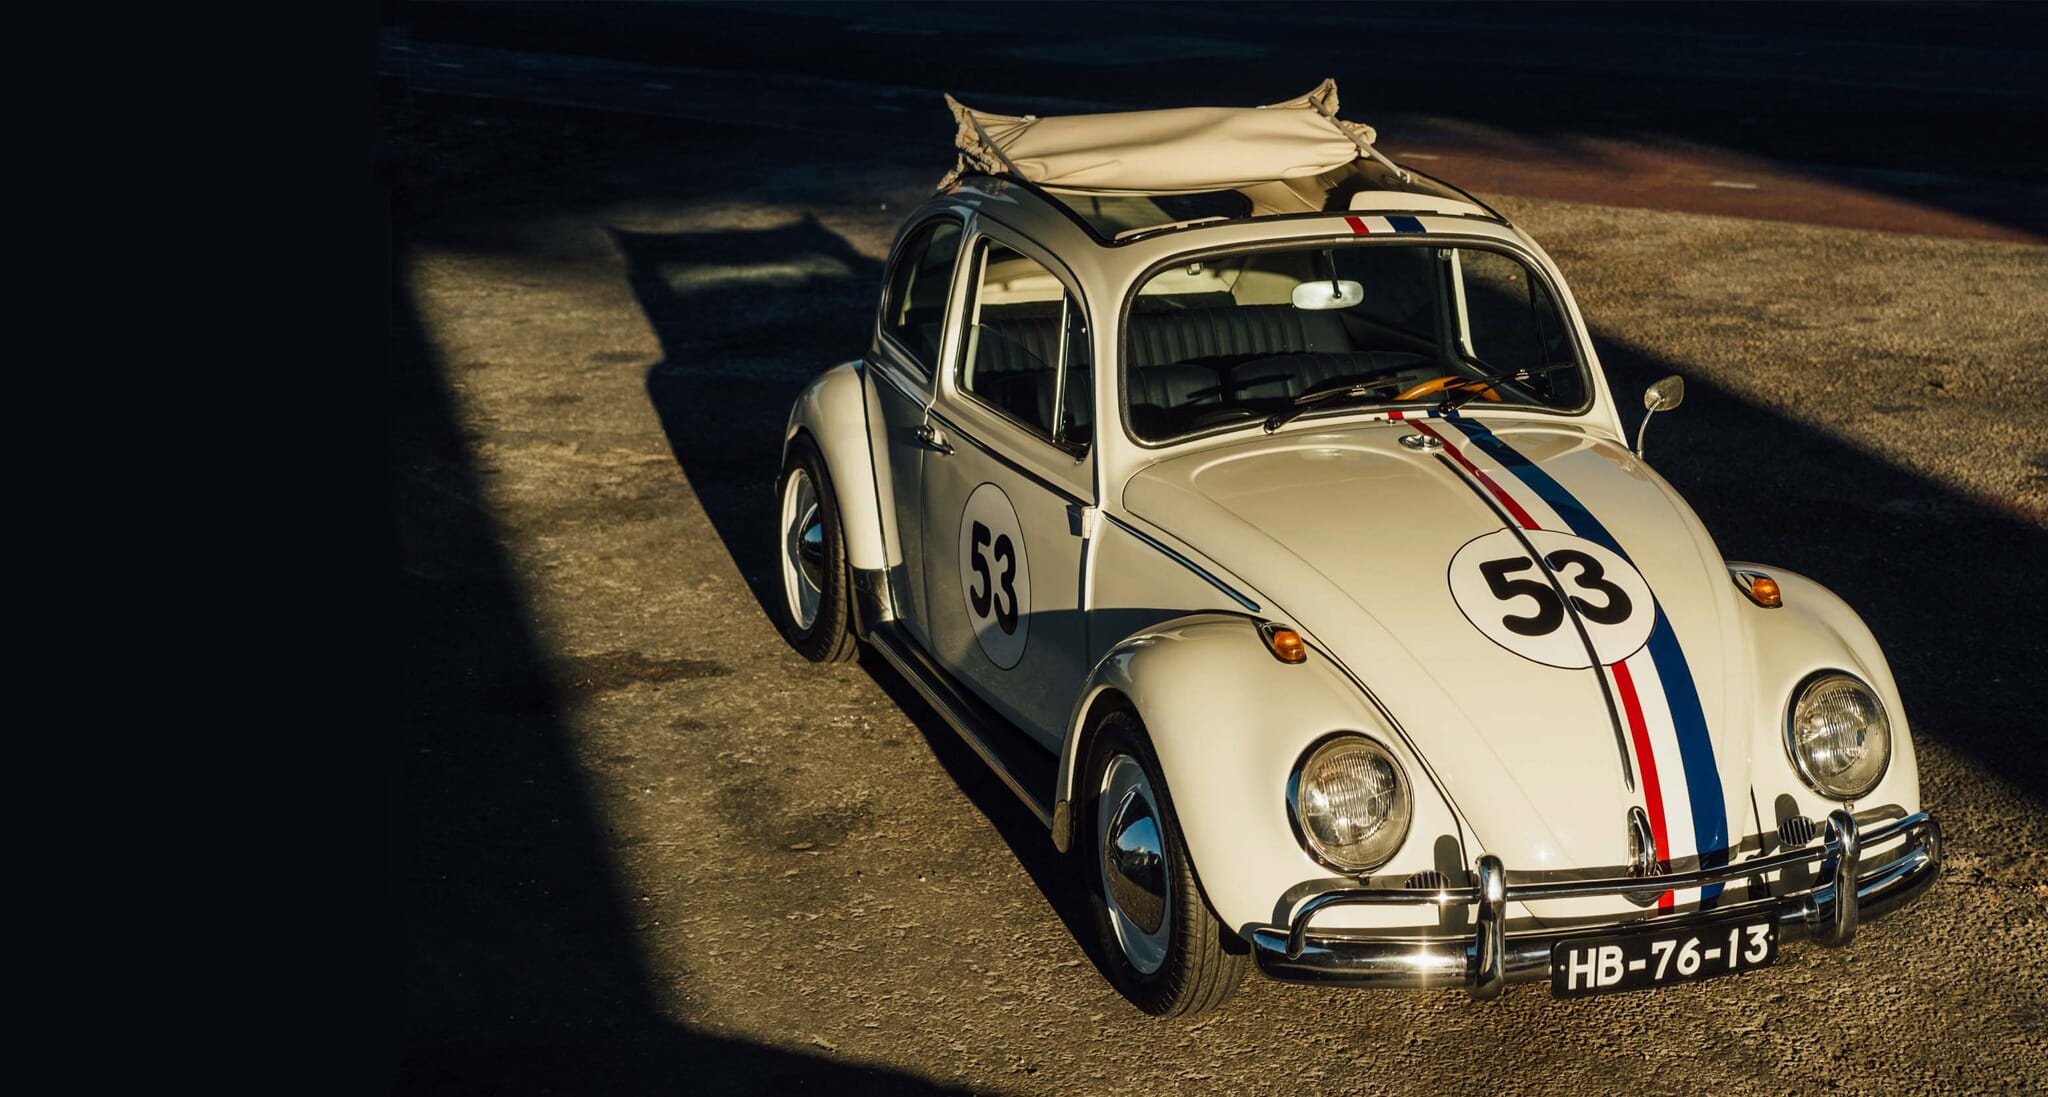 Herbie The Love Bug VW Beetle From CoolnVintage